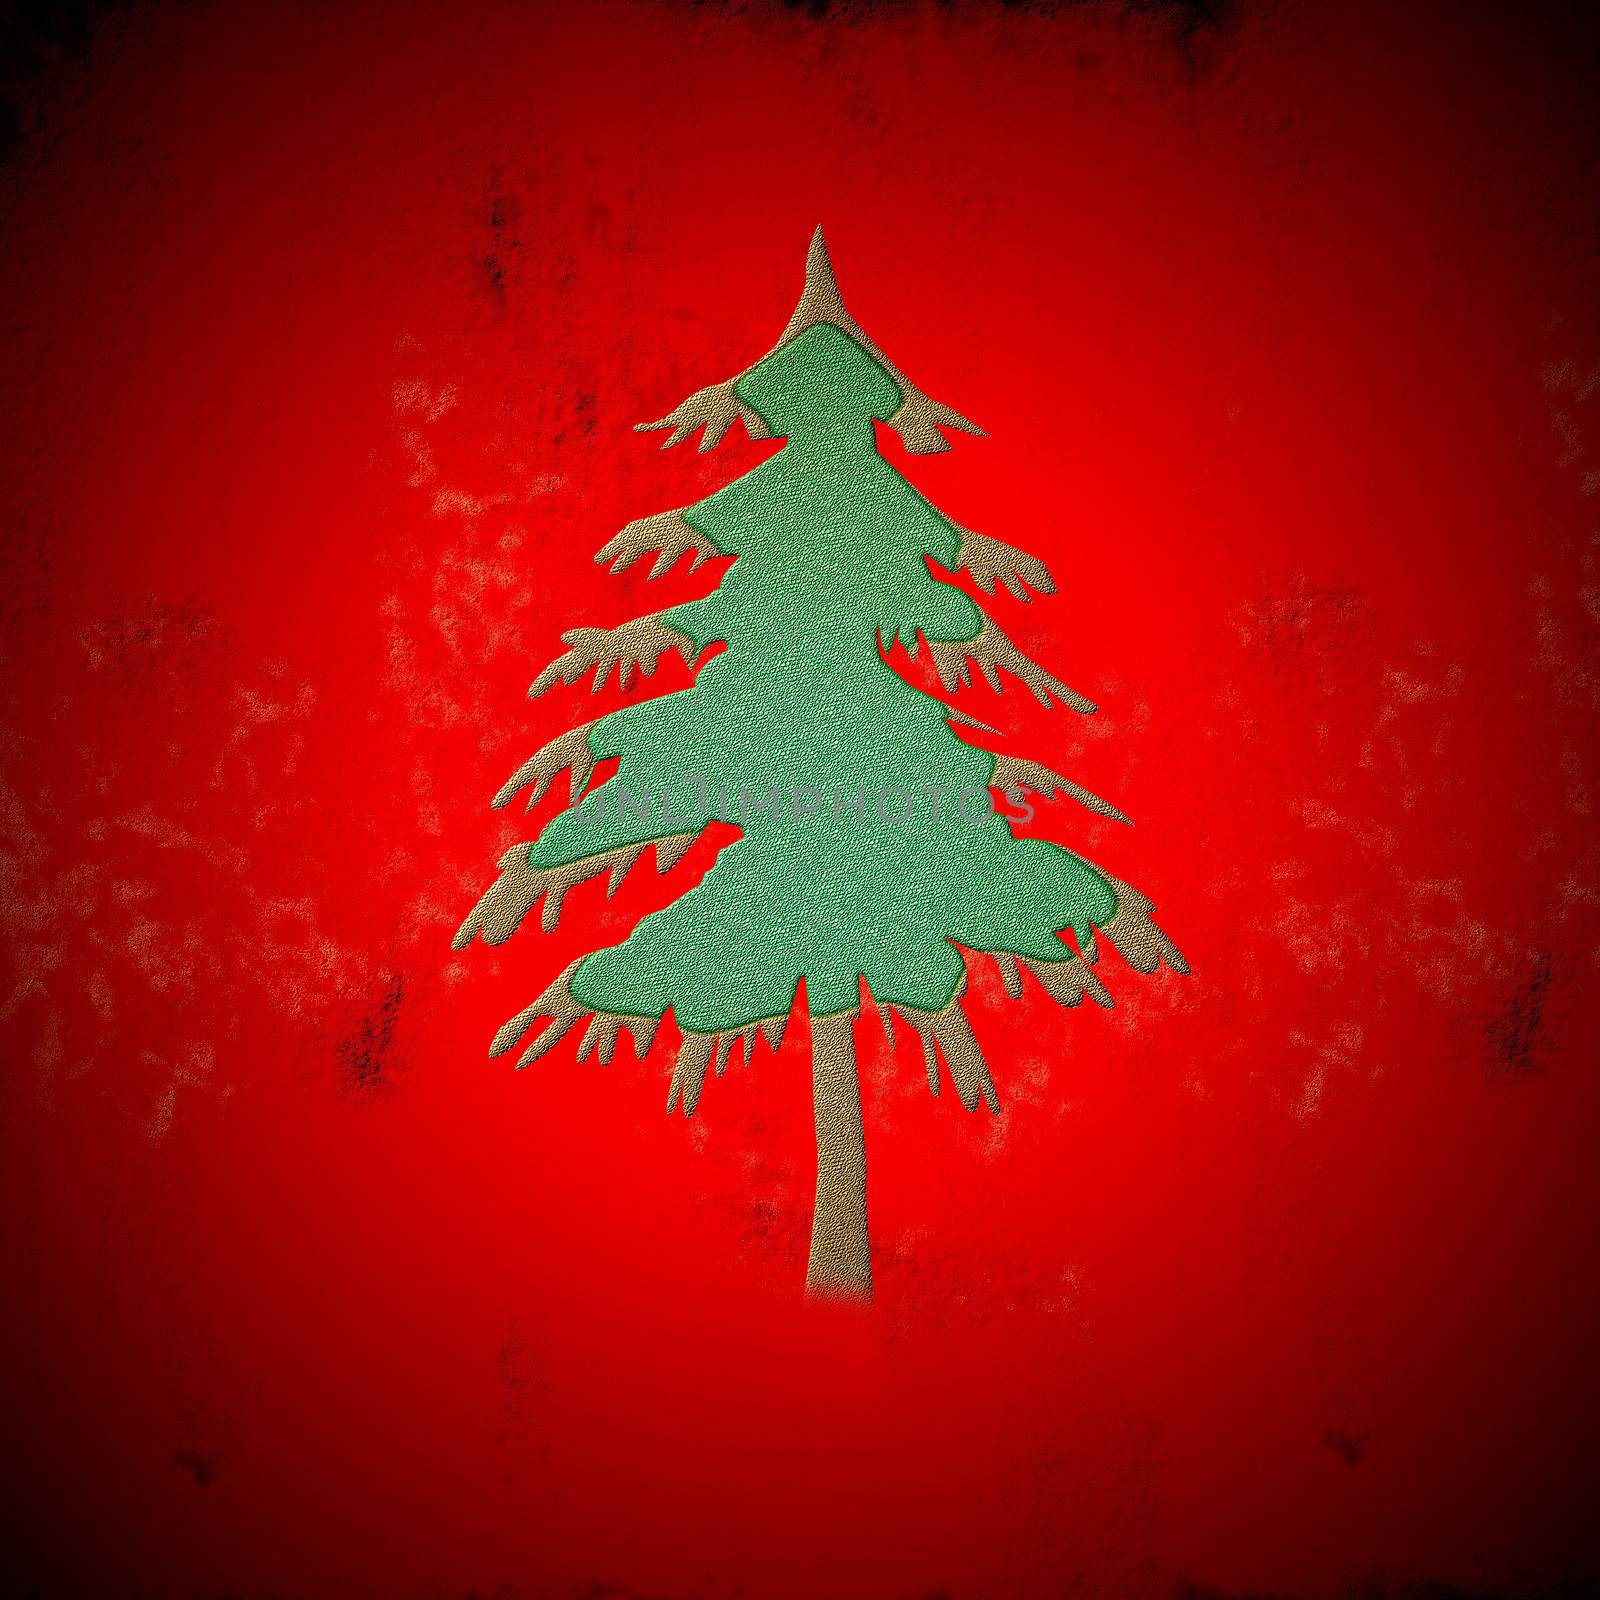 Green fir christmas tree on grunge red background by Carche